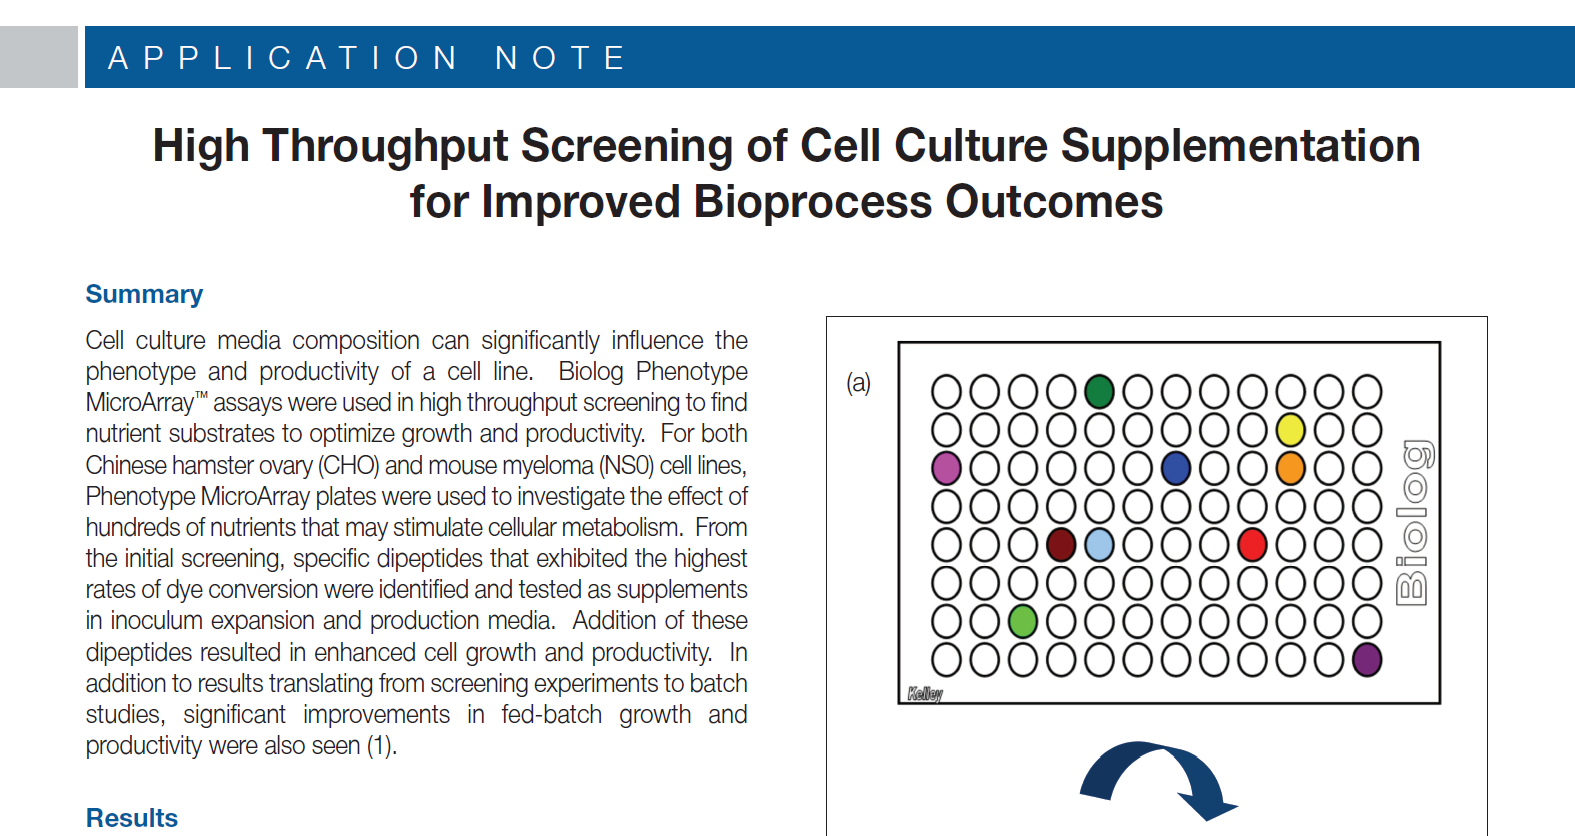 High Throughput Screening of Cell Culture Supplementation for Improved Bioprocess Outcomes_1.PNG